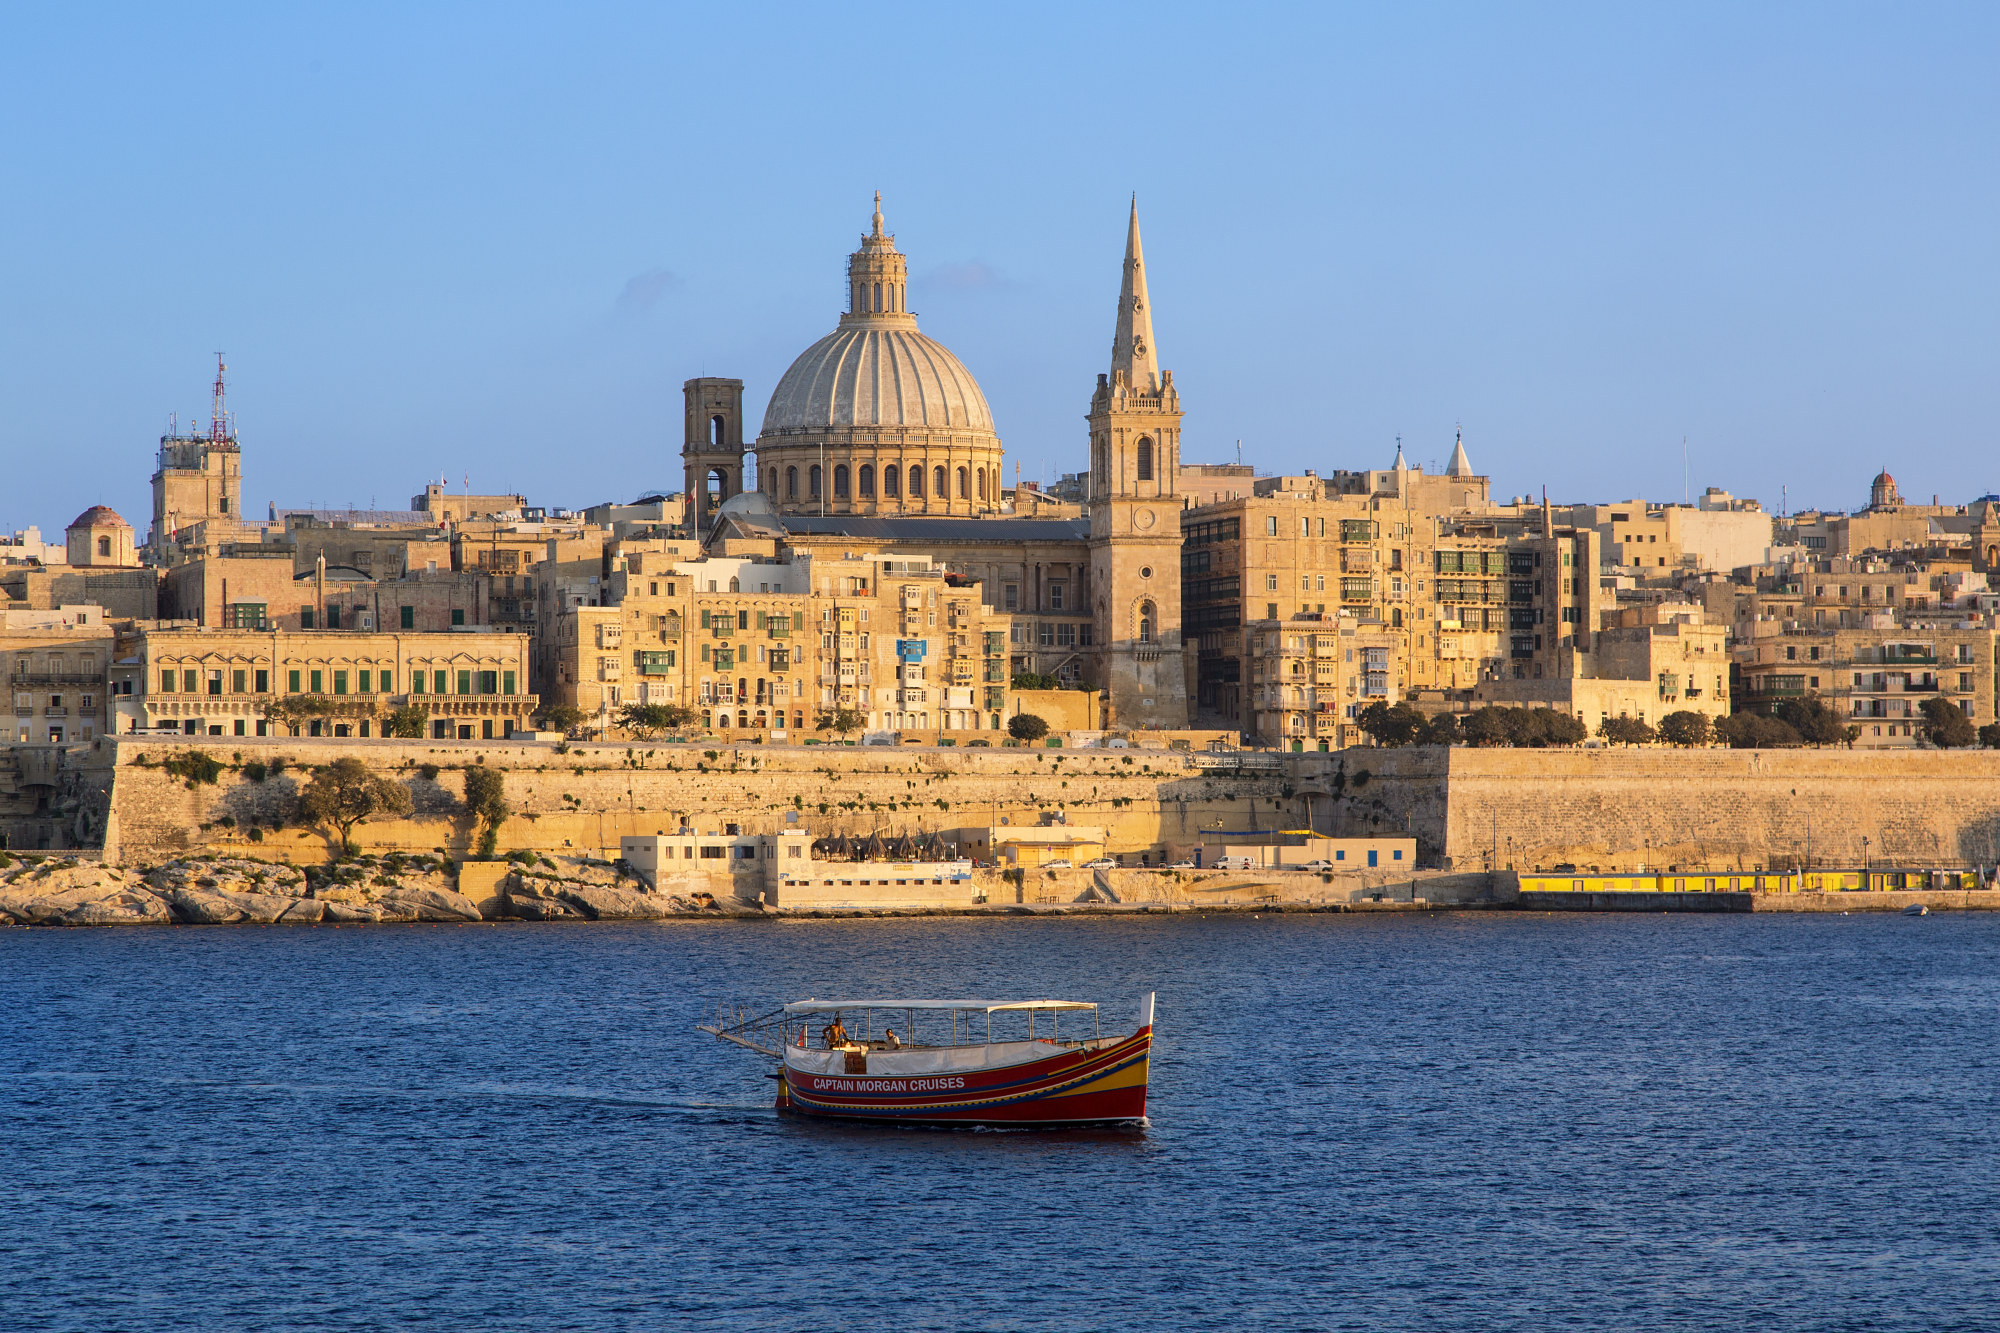 Malta’s Valletta skyline with the St. Paul’s Anglican Cathedral and Carmelite Church from Sliema. Photo: Shutterstock